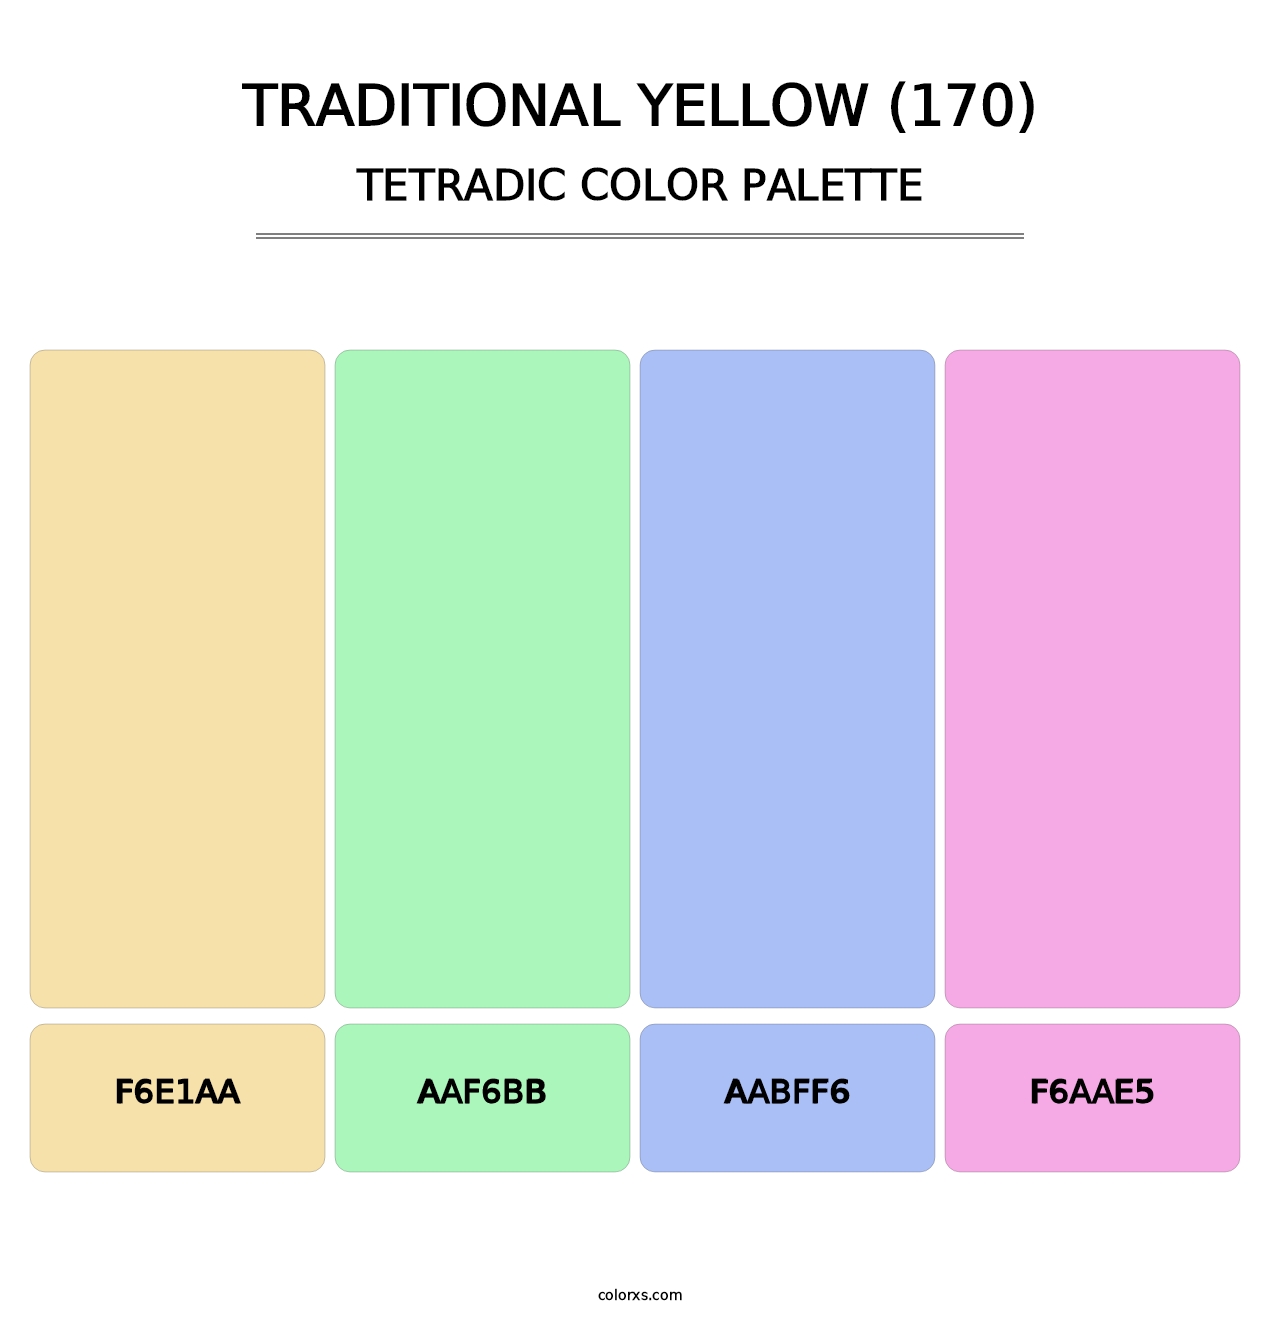 Traditional Yellow (170) - Tetradic Color Palette